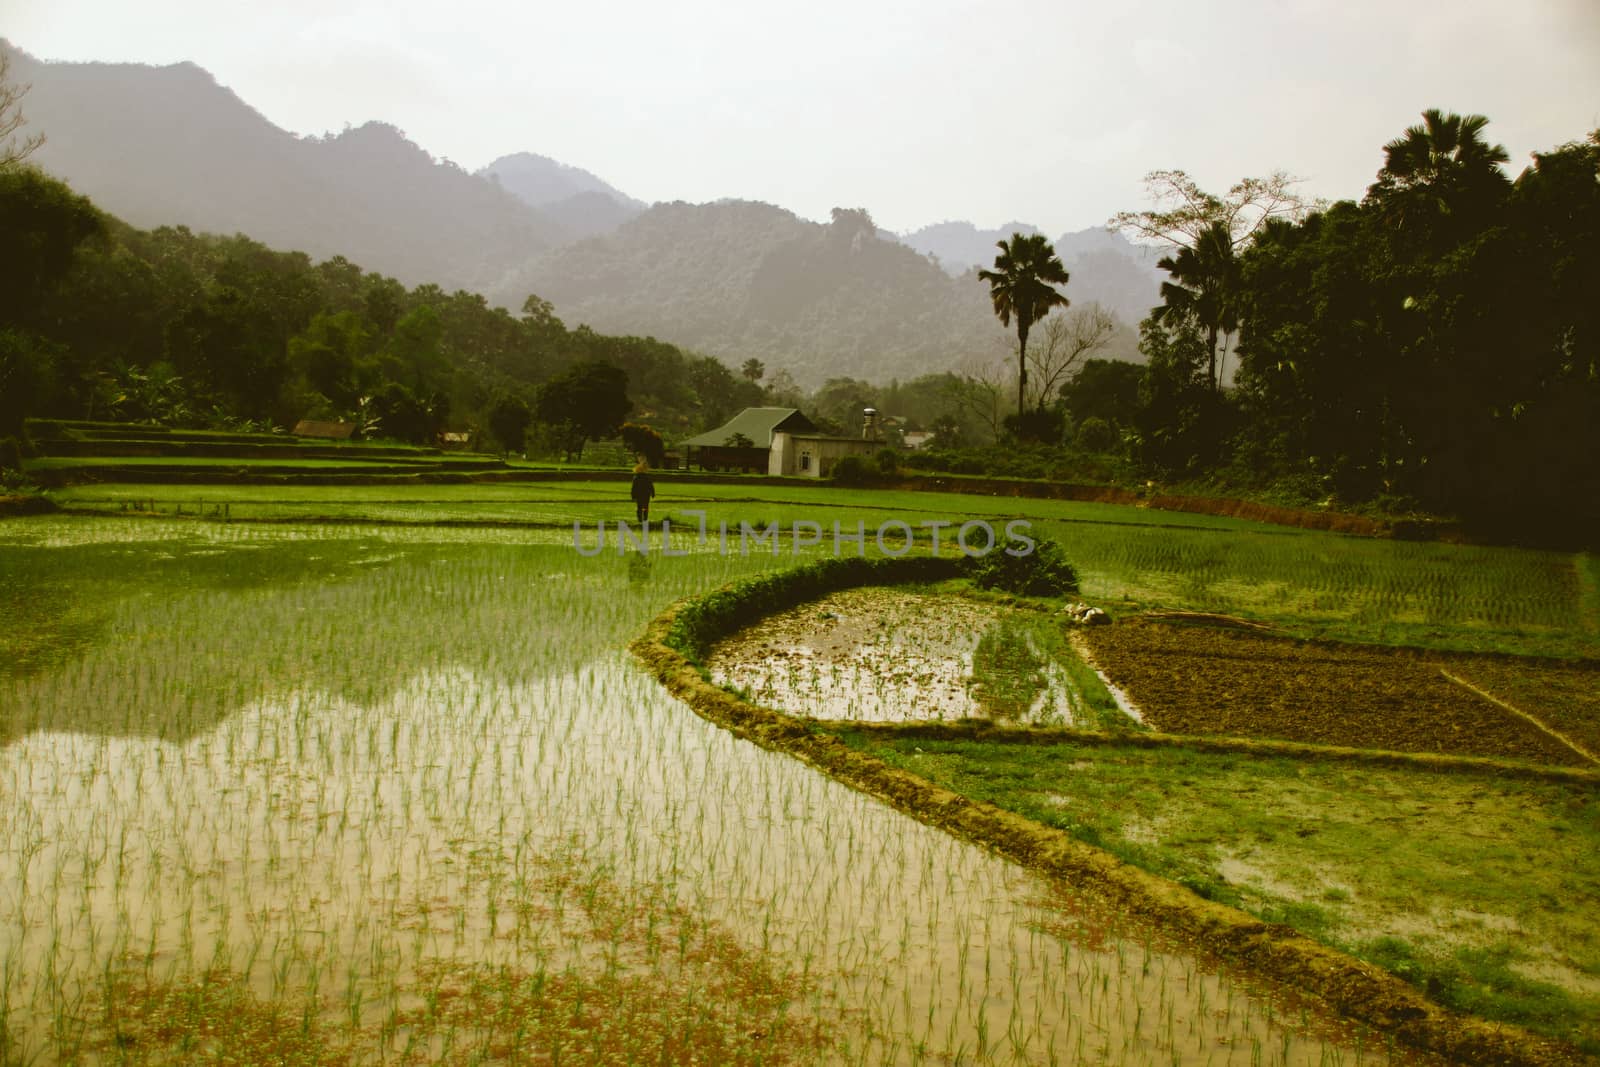 Cinematic scenery of a terraced ricefield in Ha giang, Vietnam